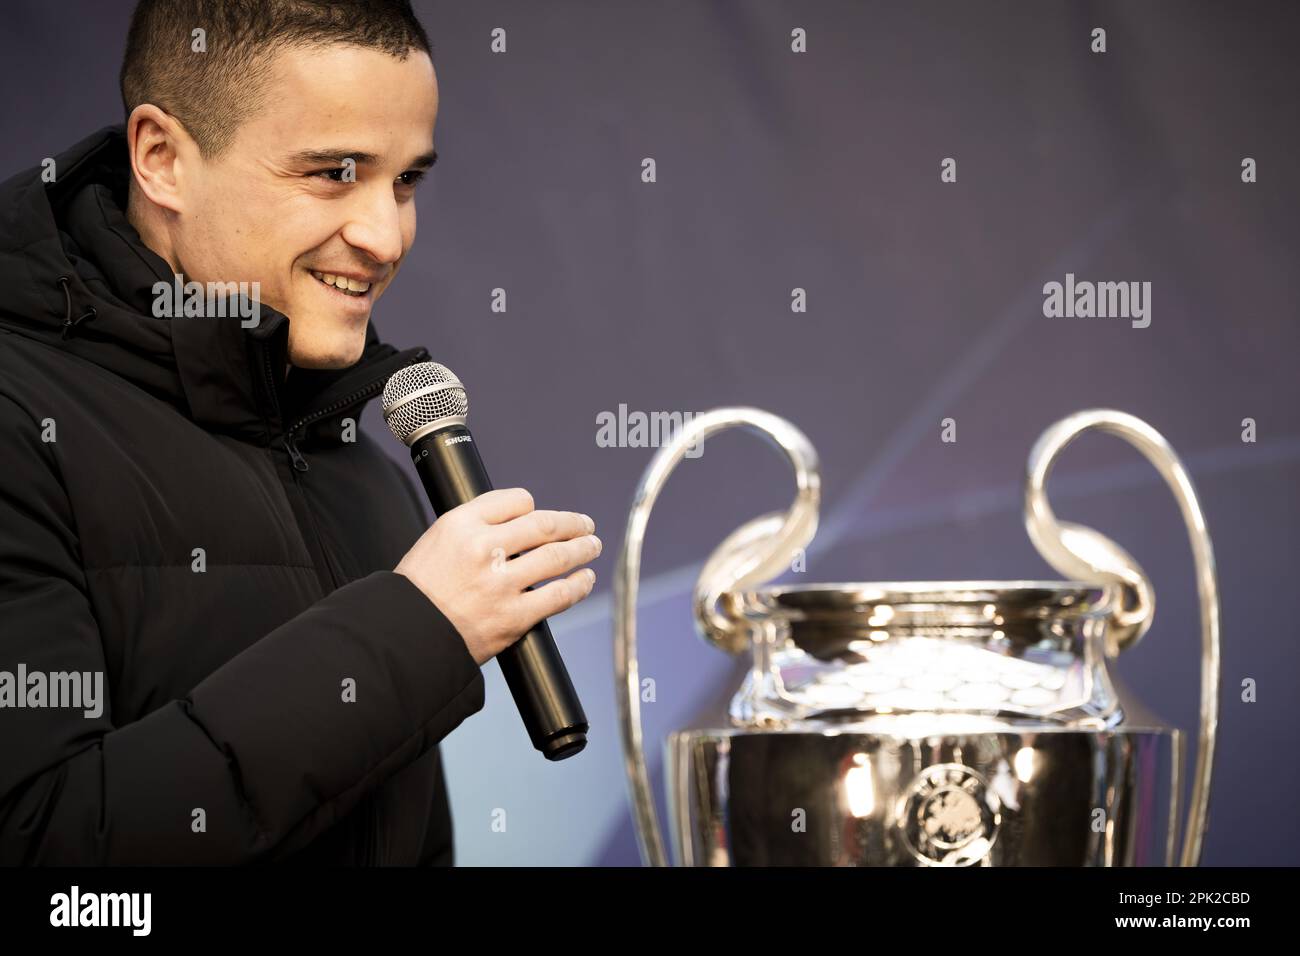 UTRECHT - 05/04/2023, Former professional football player Ibrahim Afellay reveals the official trophies of the Champions League. The cups will be awarded in June at the Champions League finals for women and men. ANP FREEK VAN DEN BERGH netherlands out - belgium out Stock Photo